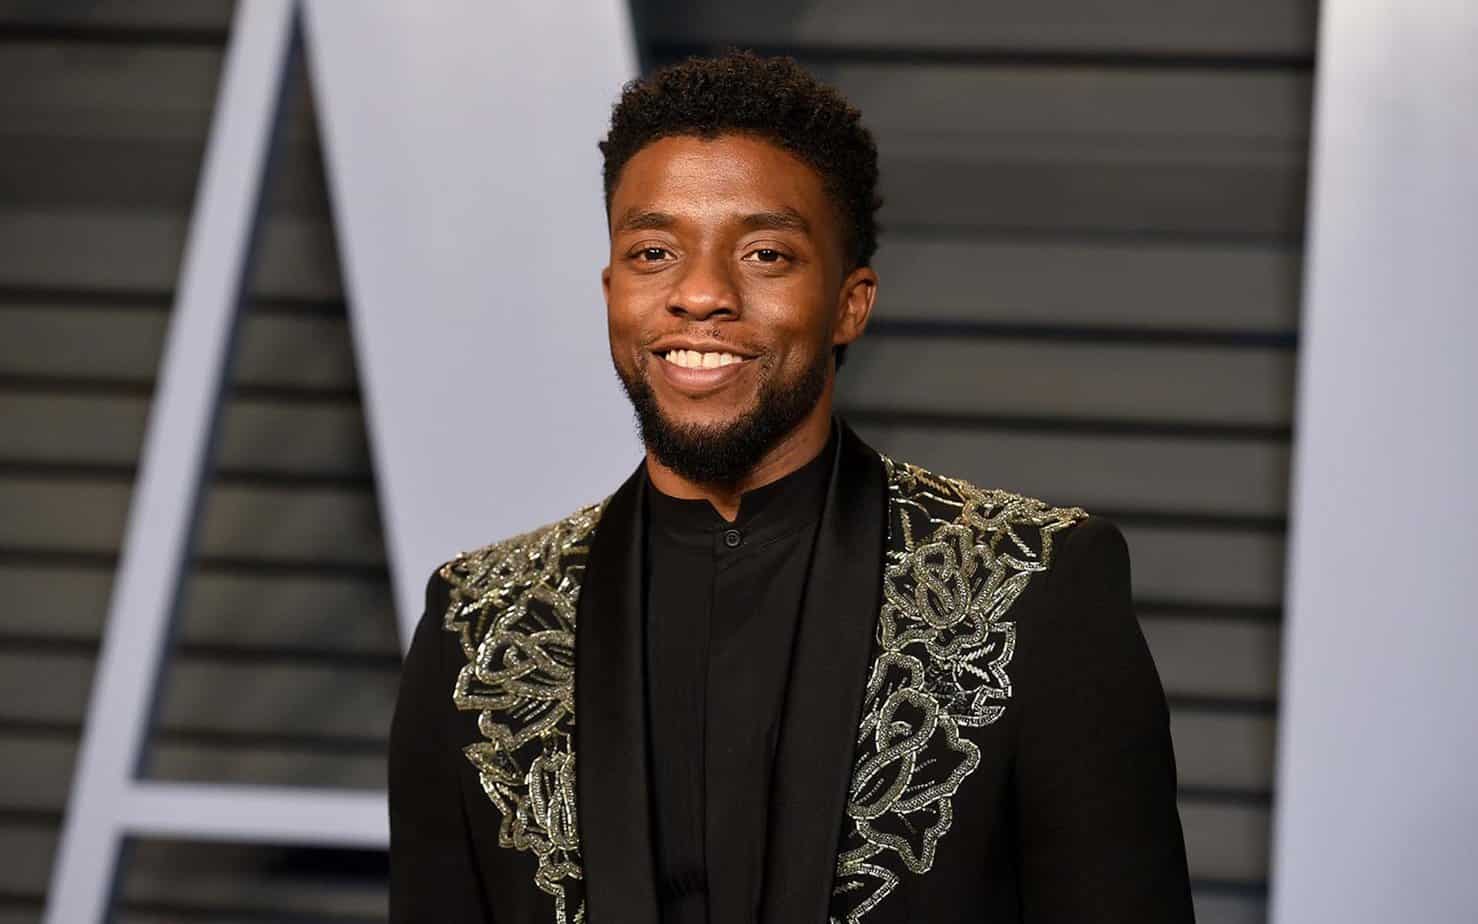 Chadwick Boseman's Latest Video Has Fans Concerned for His Health